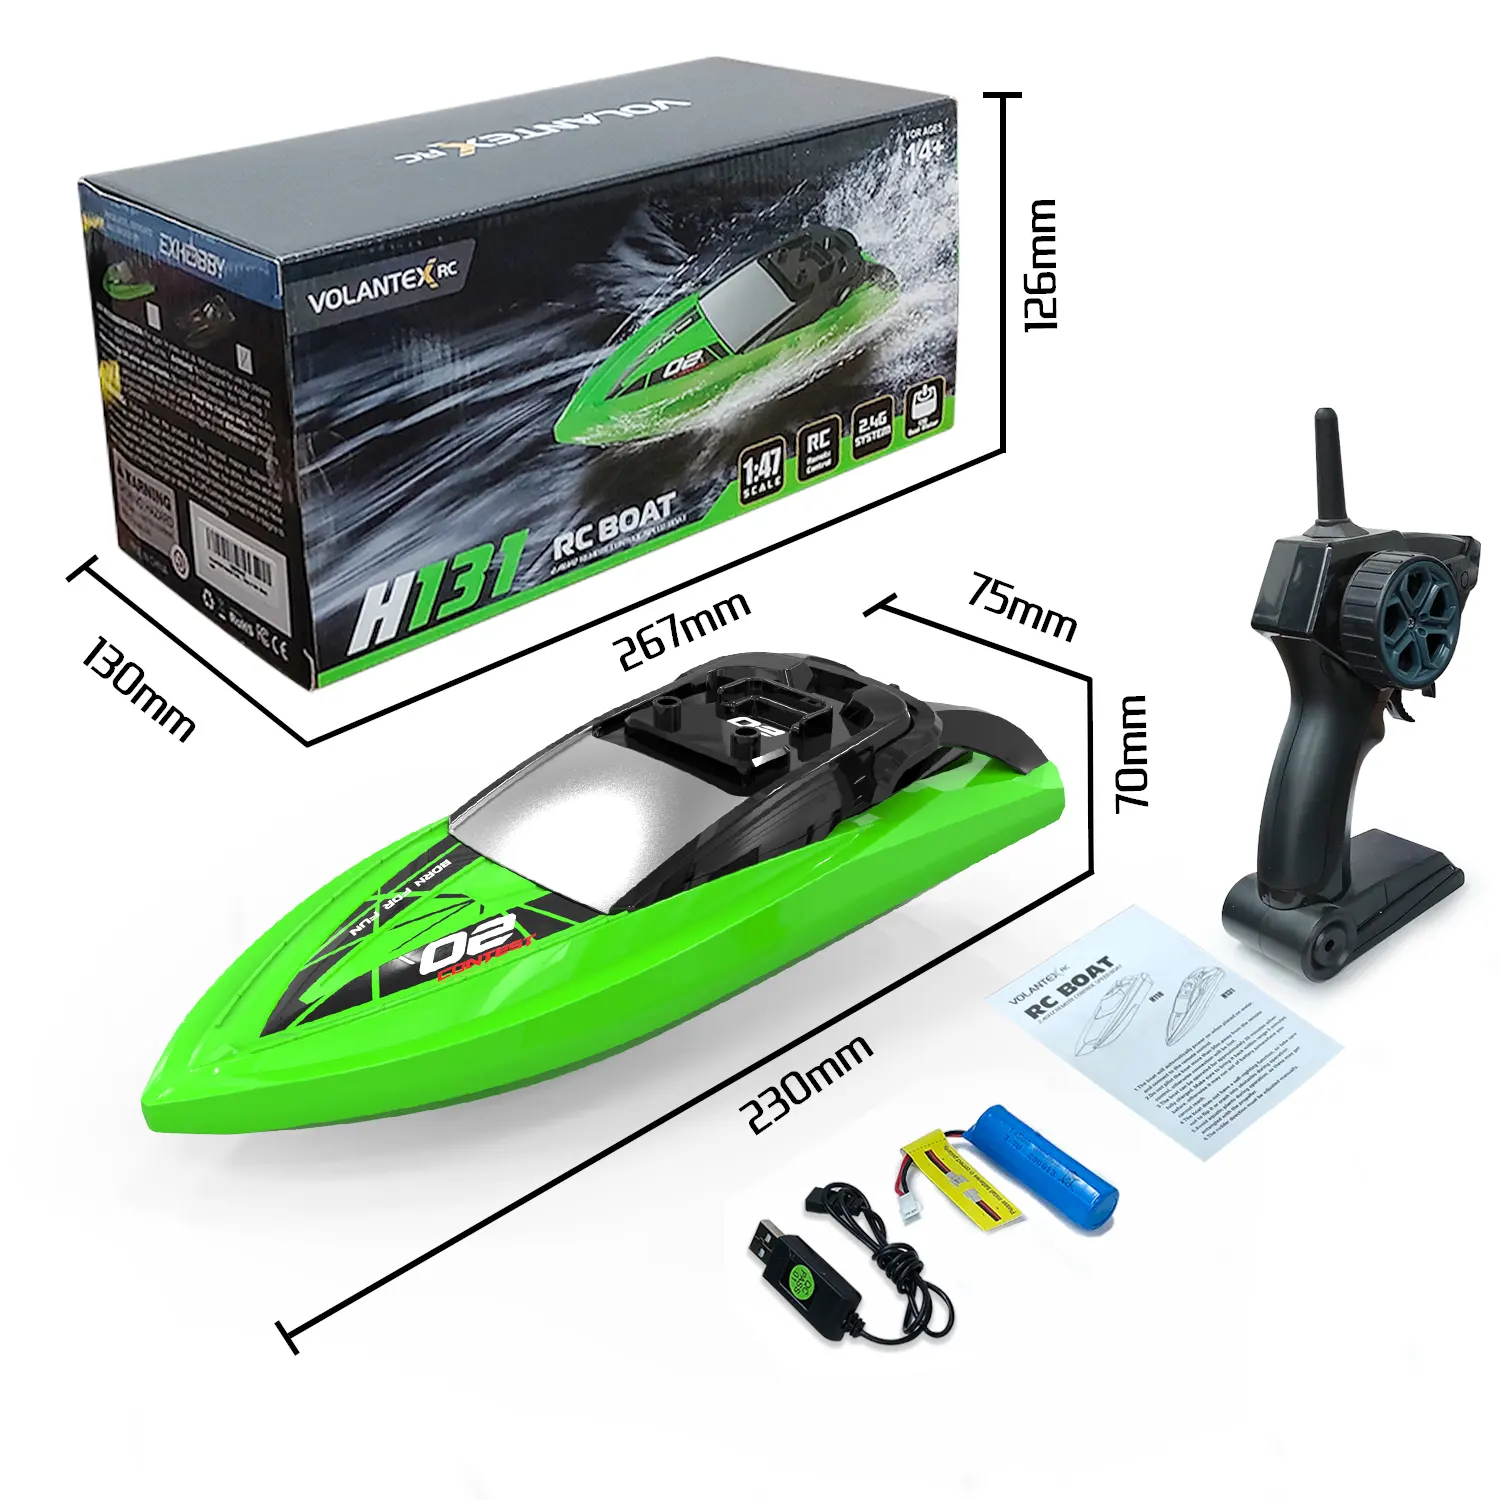 Volantex 2.4G RTR Remote Control Racing Boats for Pools and Lakes